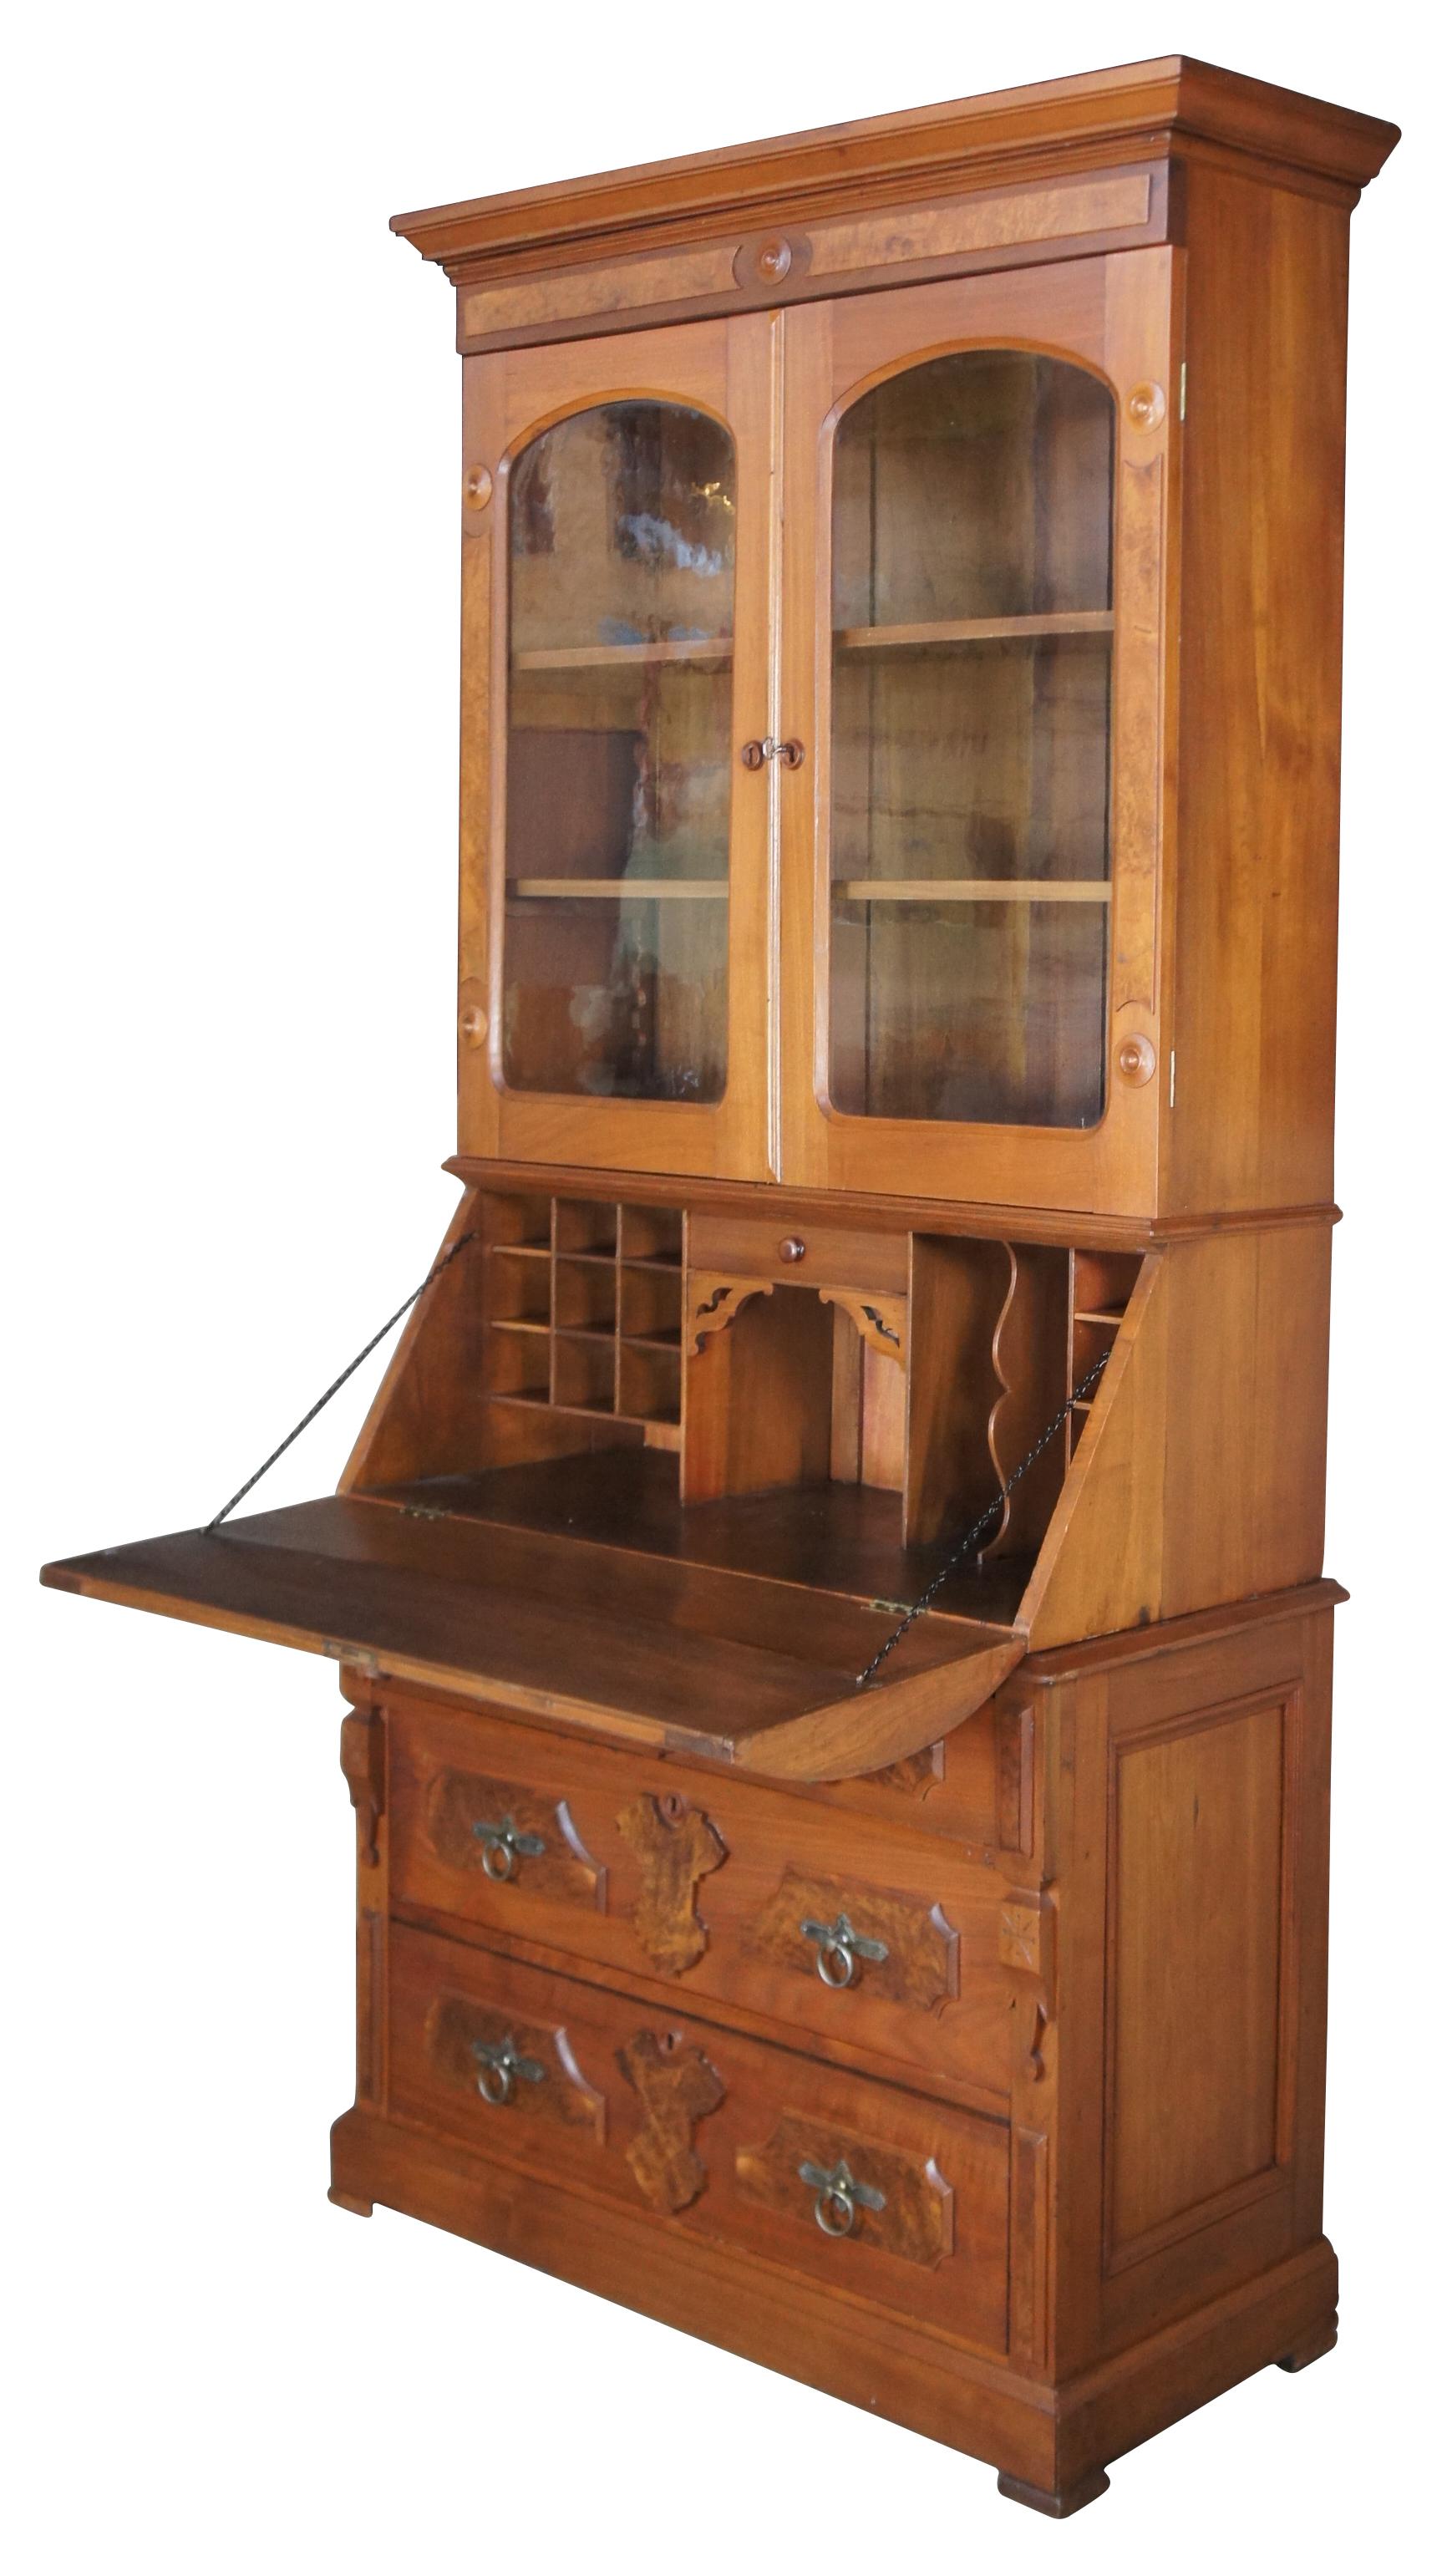 An exquisite antique Victorian Eastlake drop front secretary desk and bookcase; circa 1880s. Made of solid walnut accented in crotch walnut. Features a unique form having the appearance of a half cylinder desk with hutch and three lower drawers.